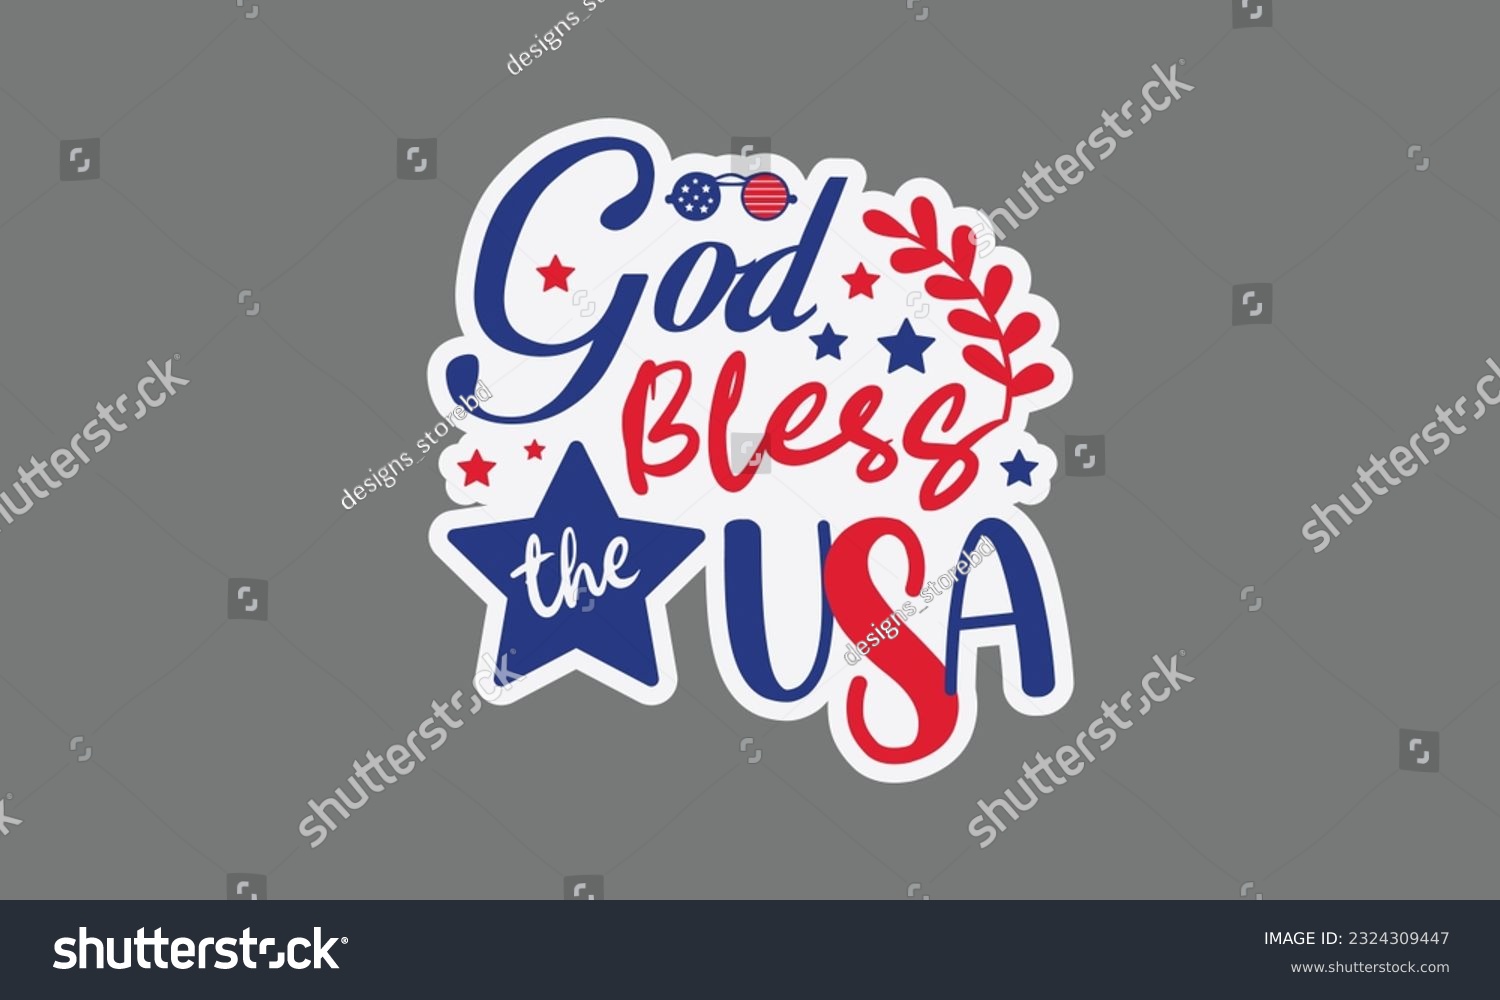 SVG of God bless the usa svg, 4th of July svg, Patriotic , Happy 4th Of July, America shirt , Fourth of July sticker, independence day usa memorial day typography tshirt design vector file svg